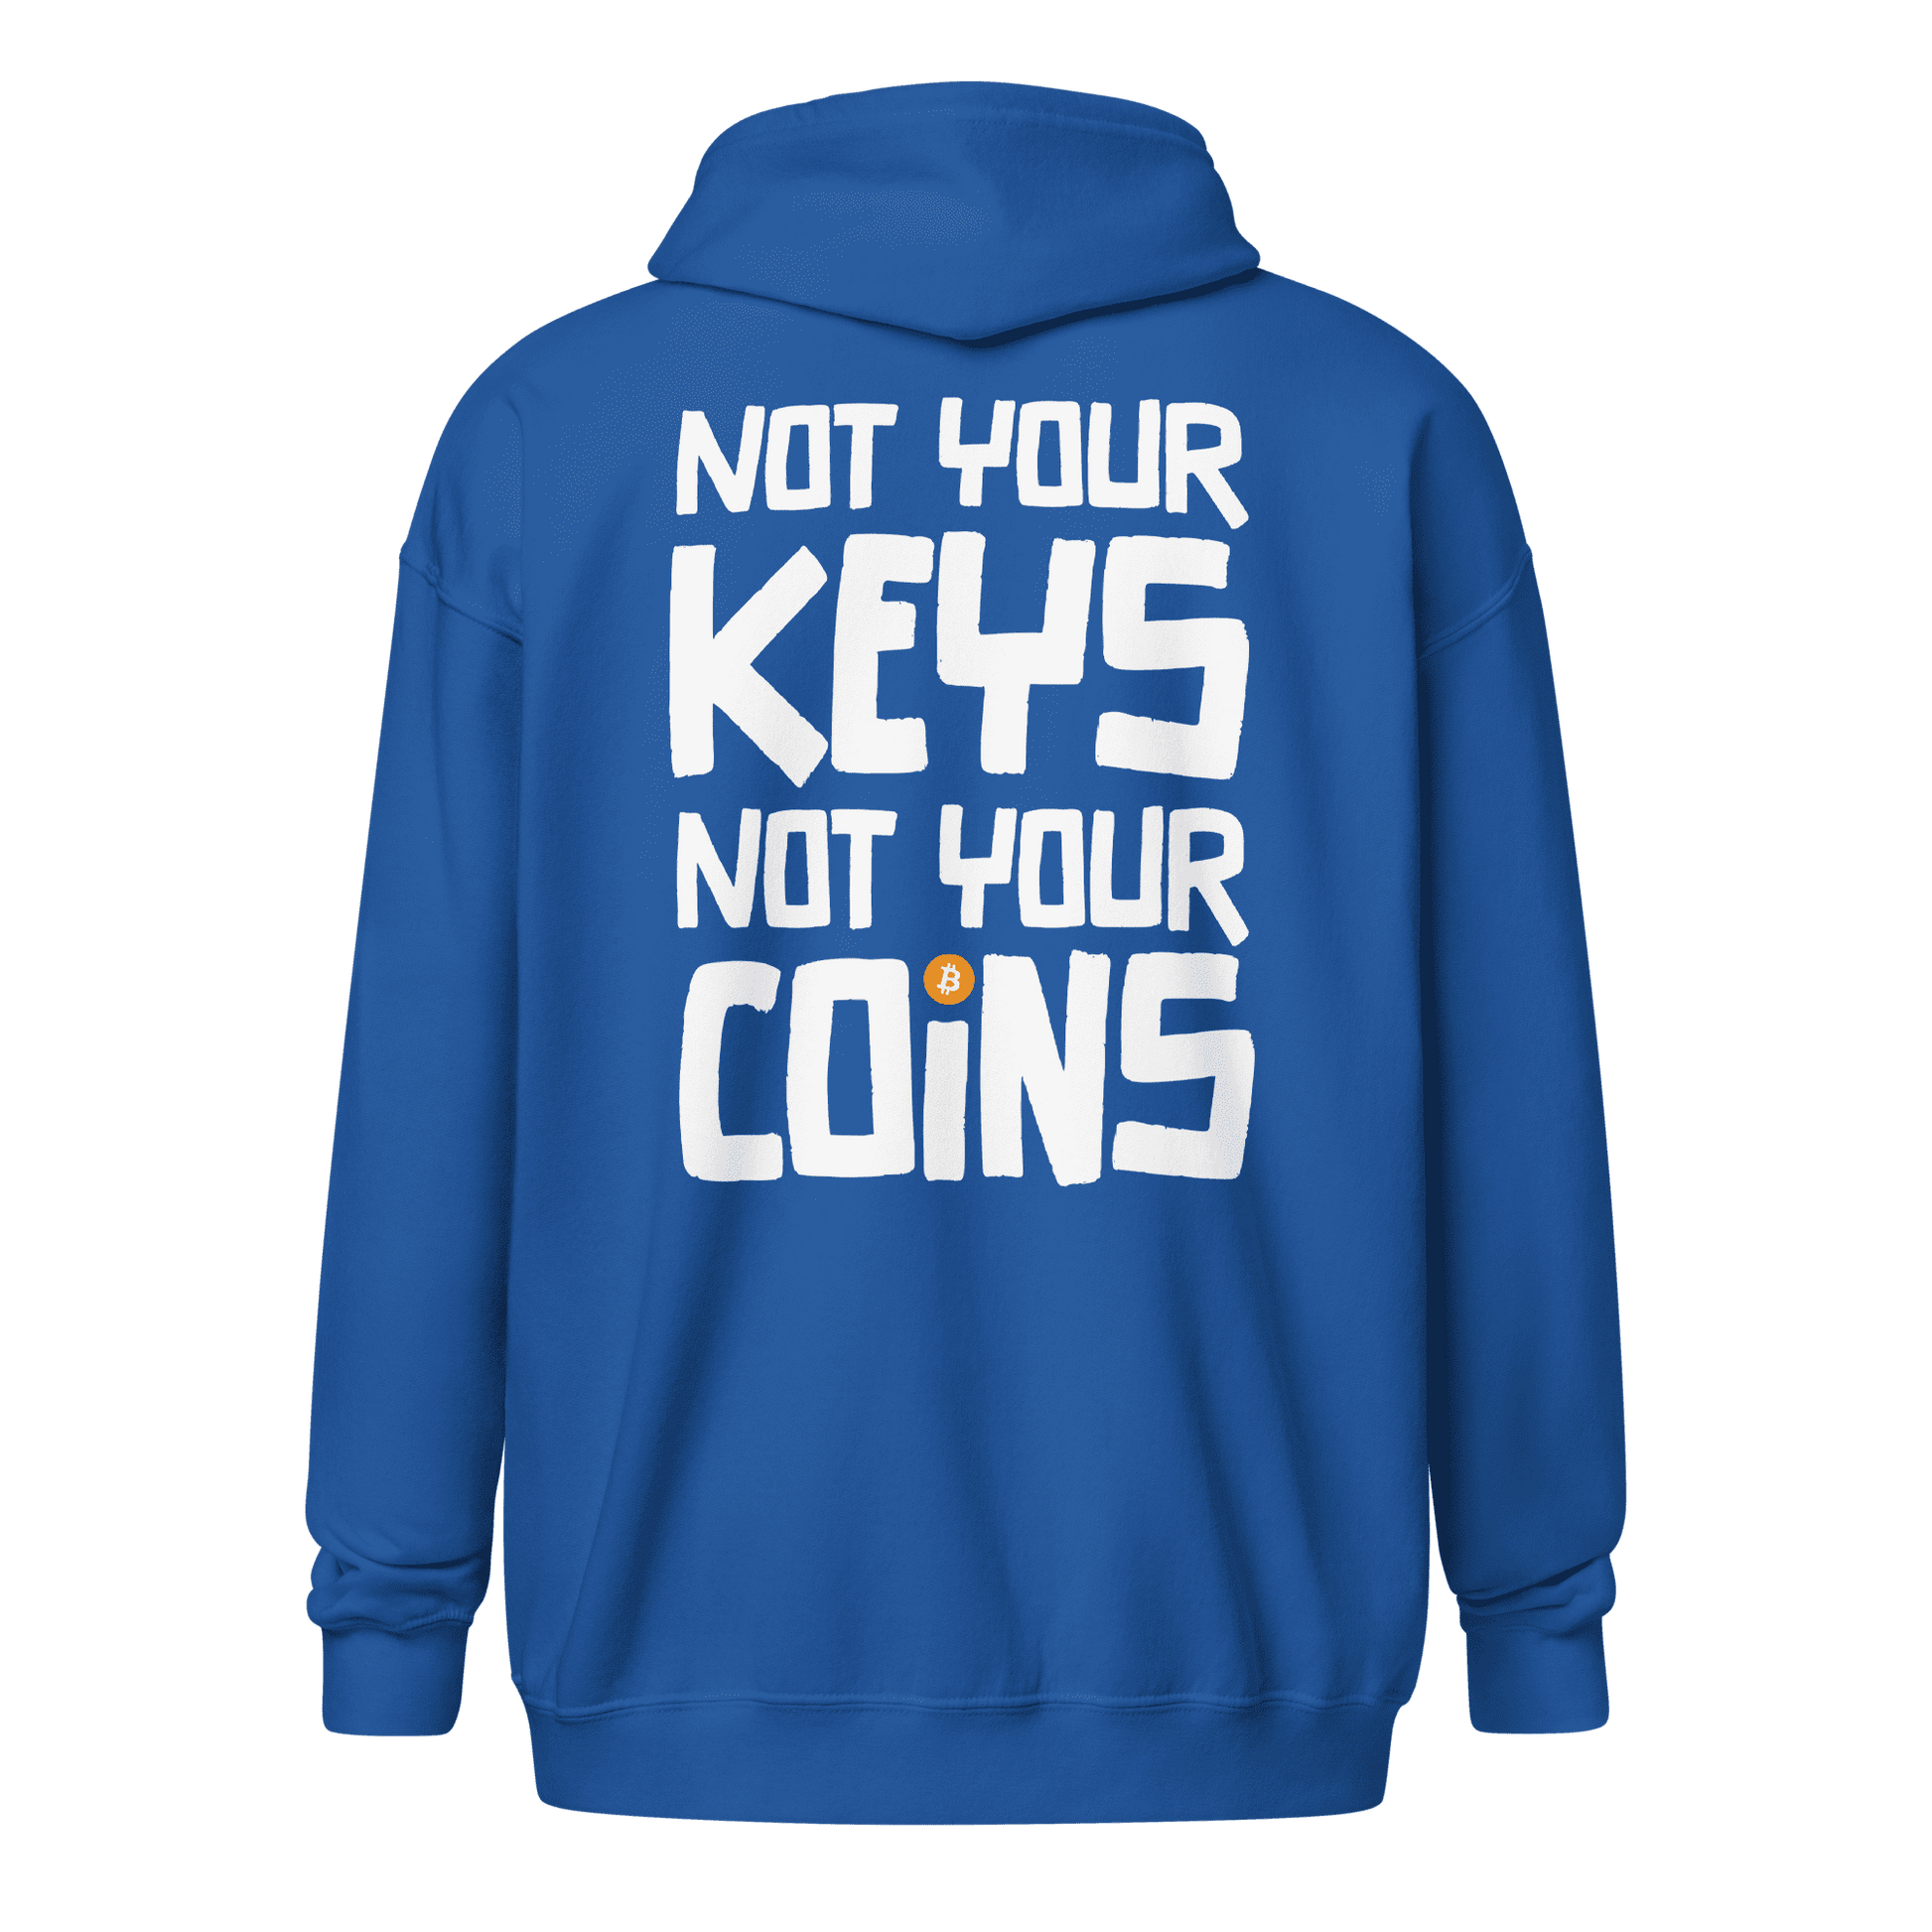 Back view of a royal blue bitcoin zip hoodie.